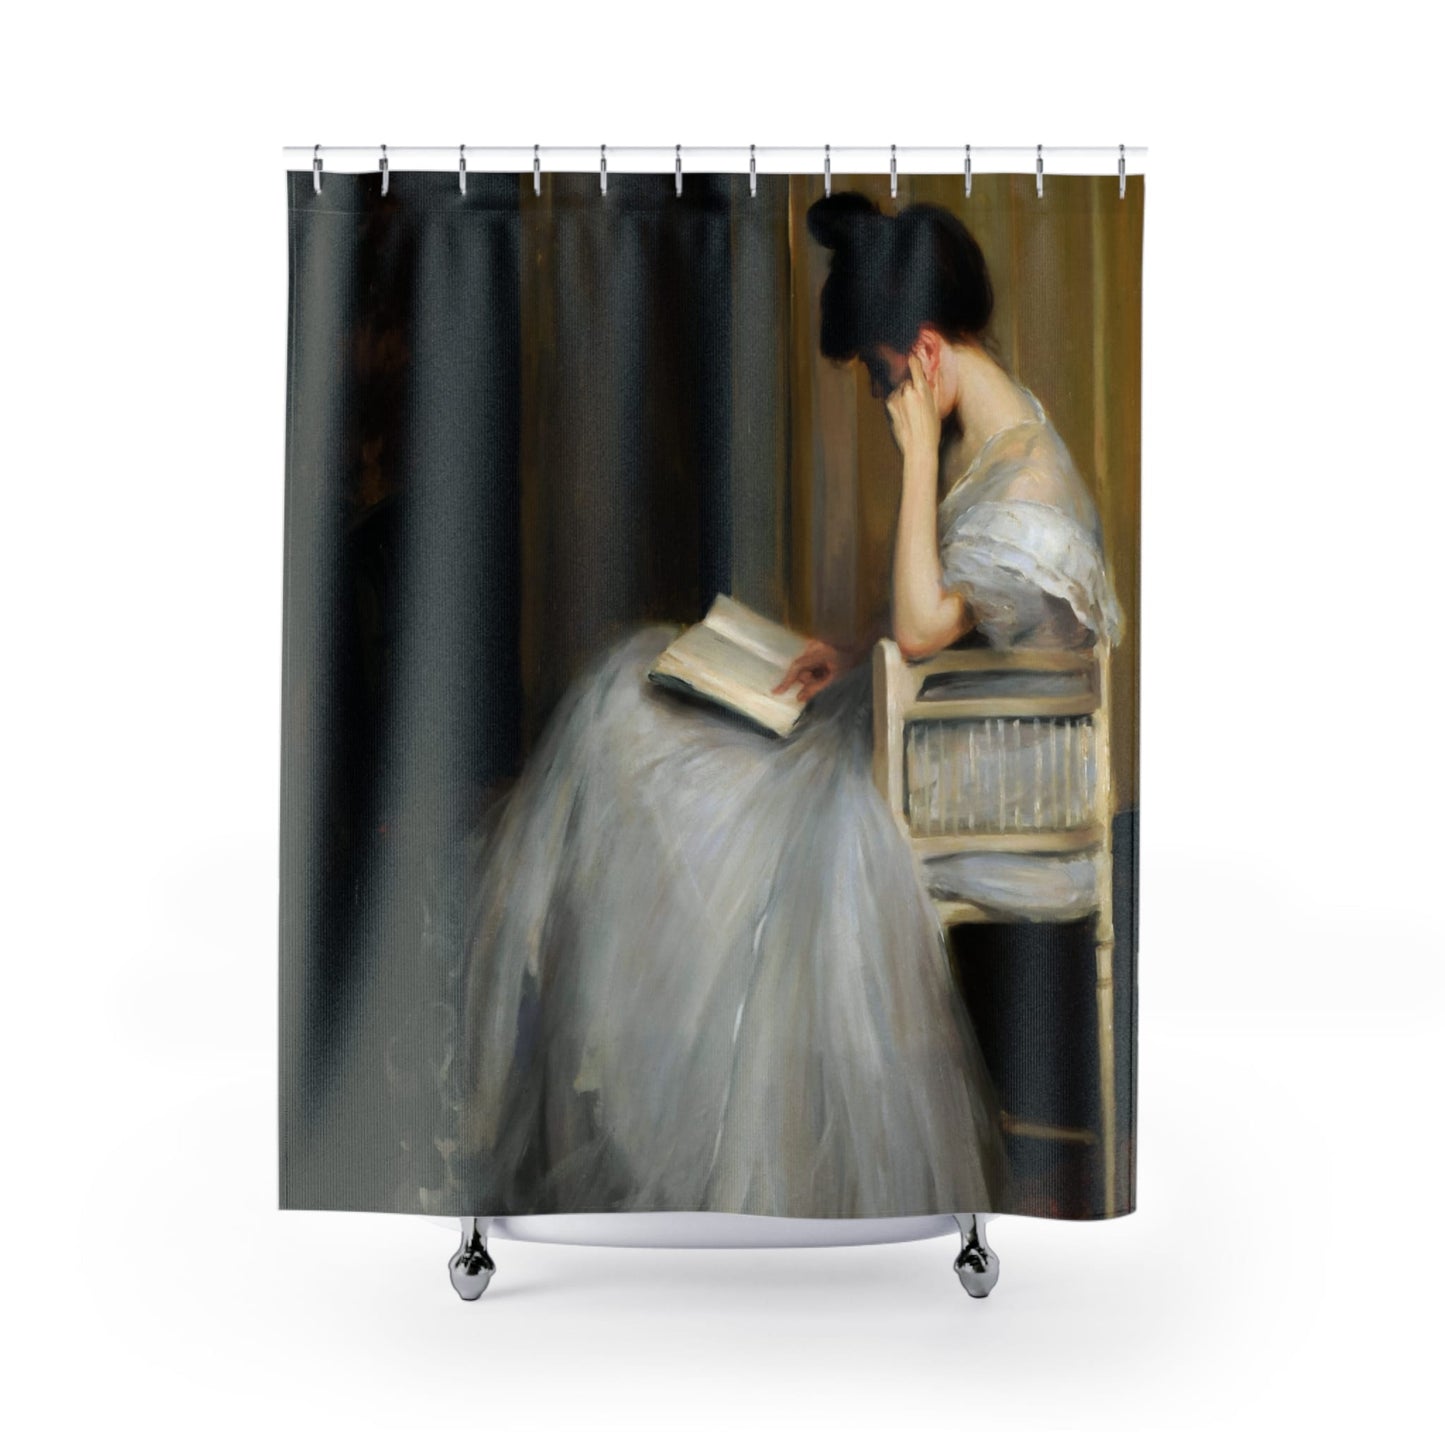 Woman Reading Shower Curtain with vintage oil painting design, classic bathroom decor featuring historical reading scenes.